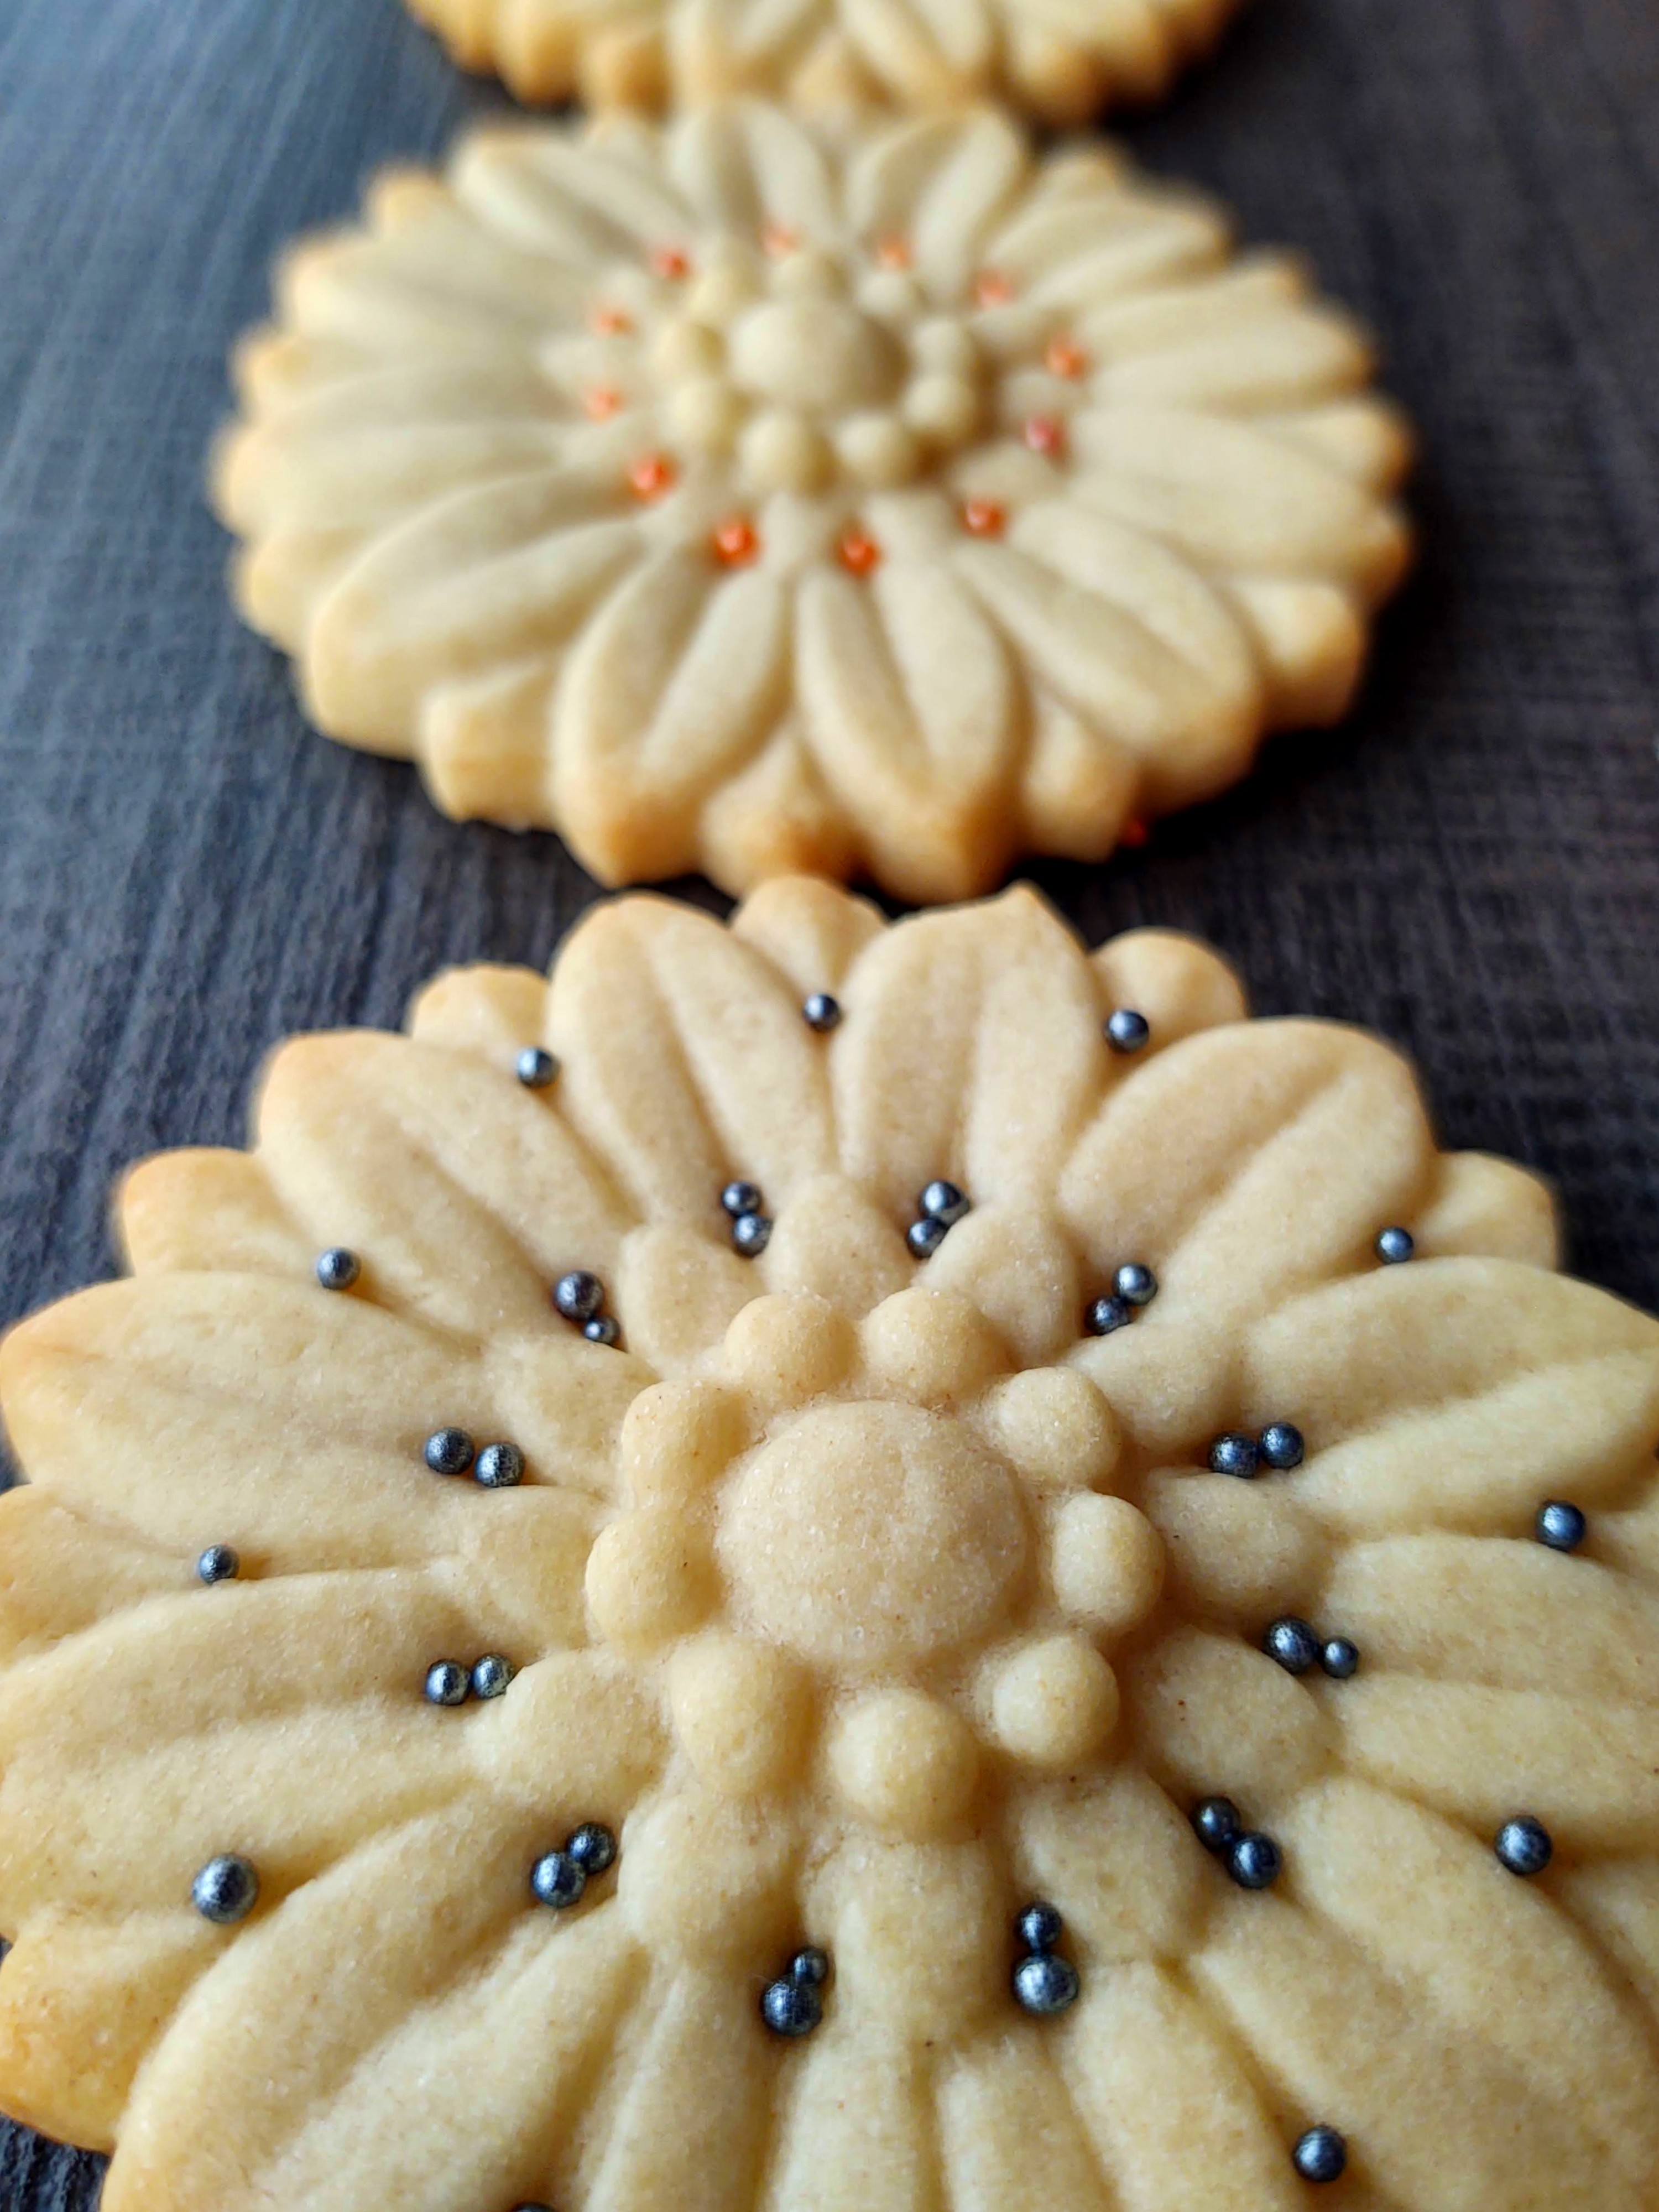 Flower Power Silicone Cookie Mold – Artesão Cookie Molds